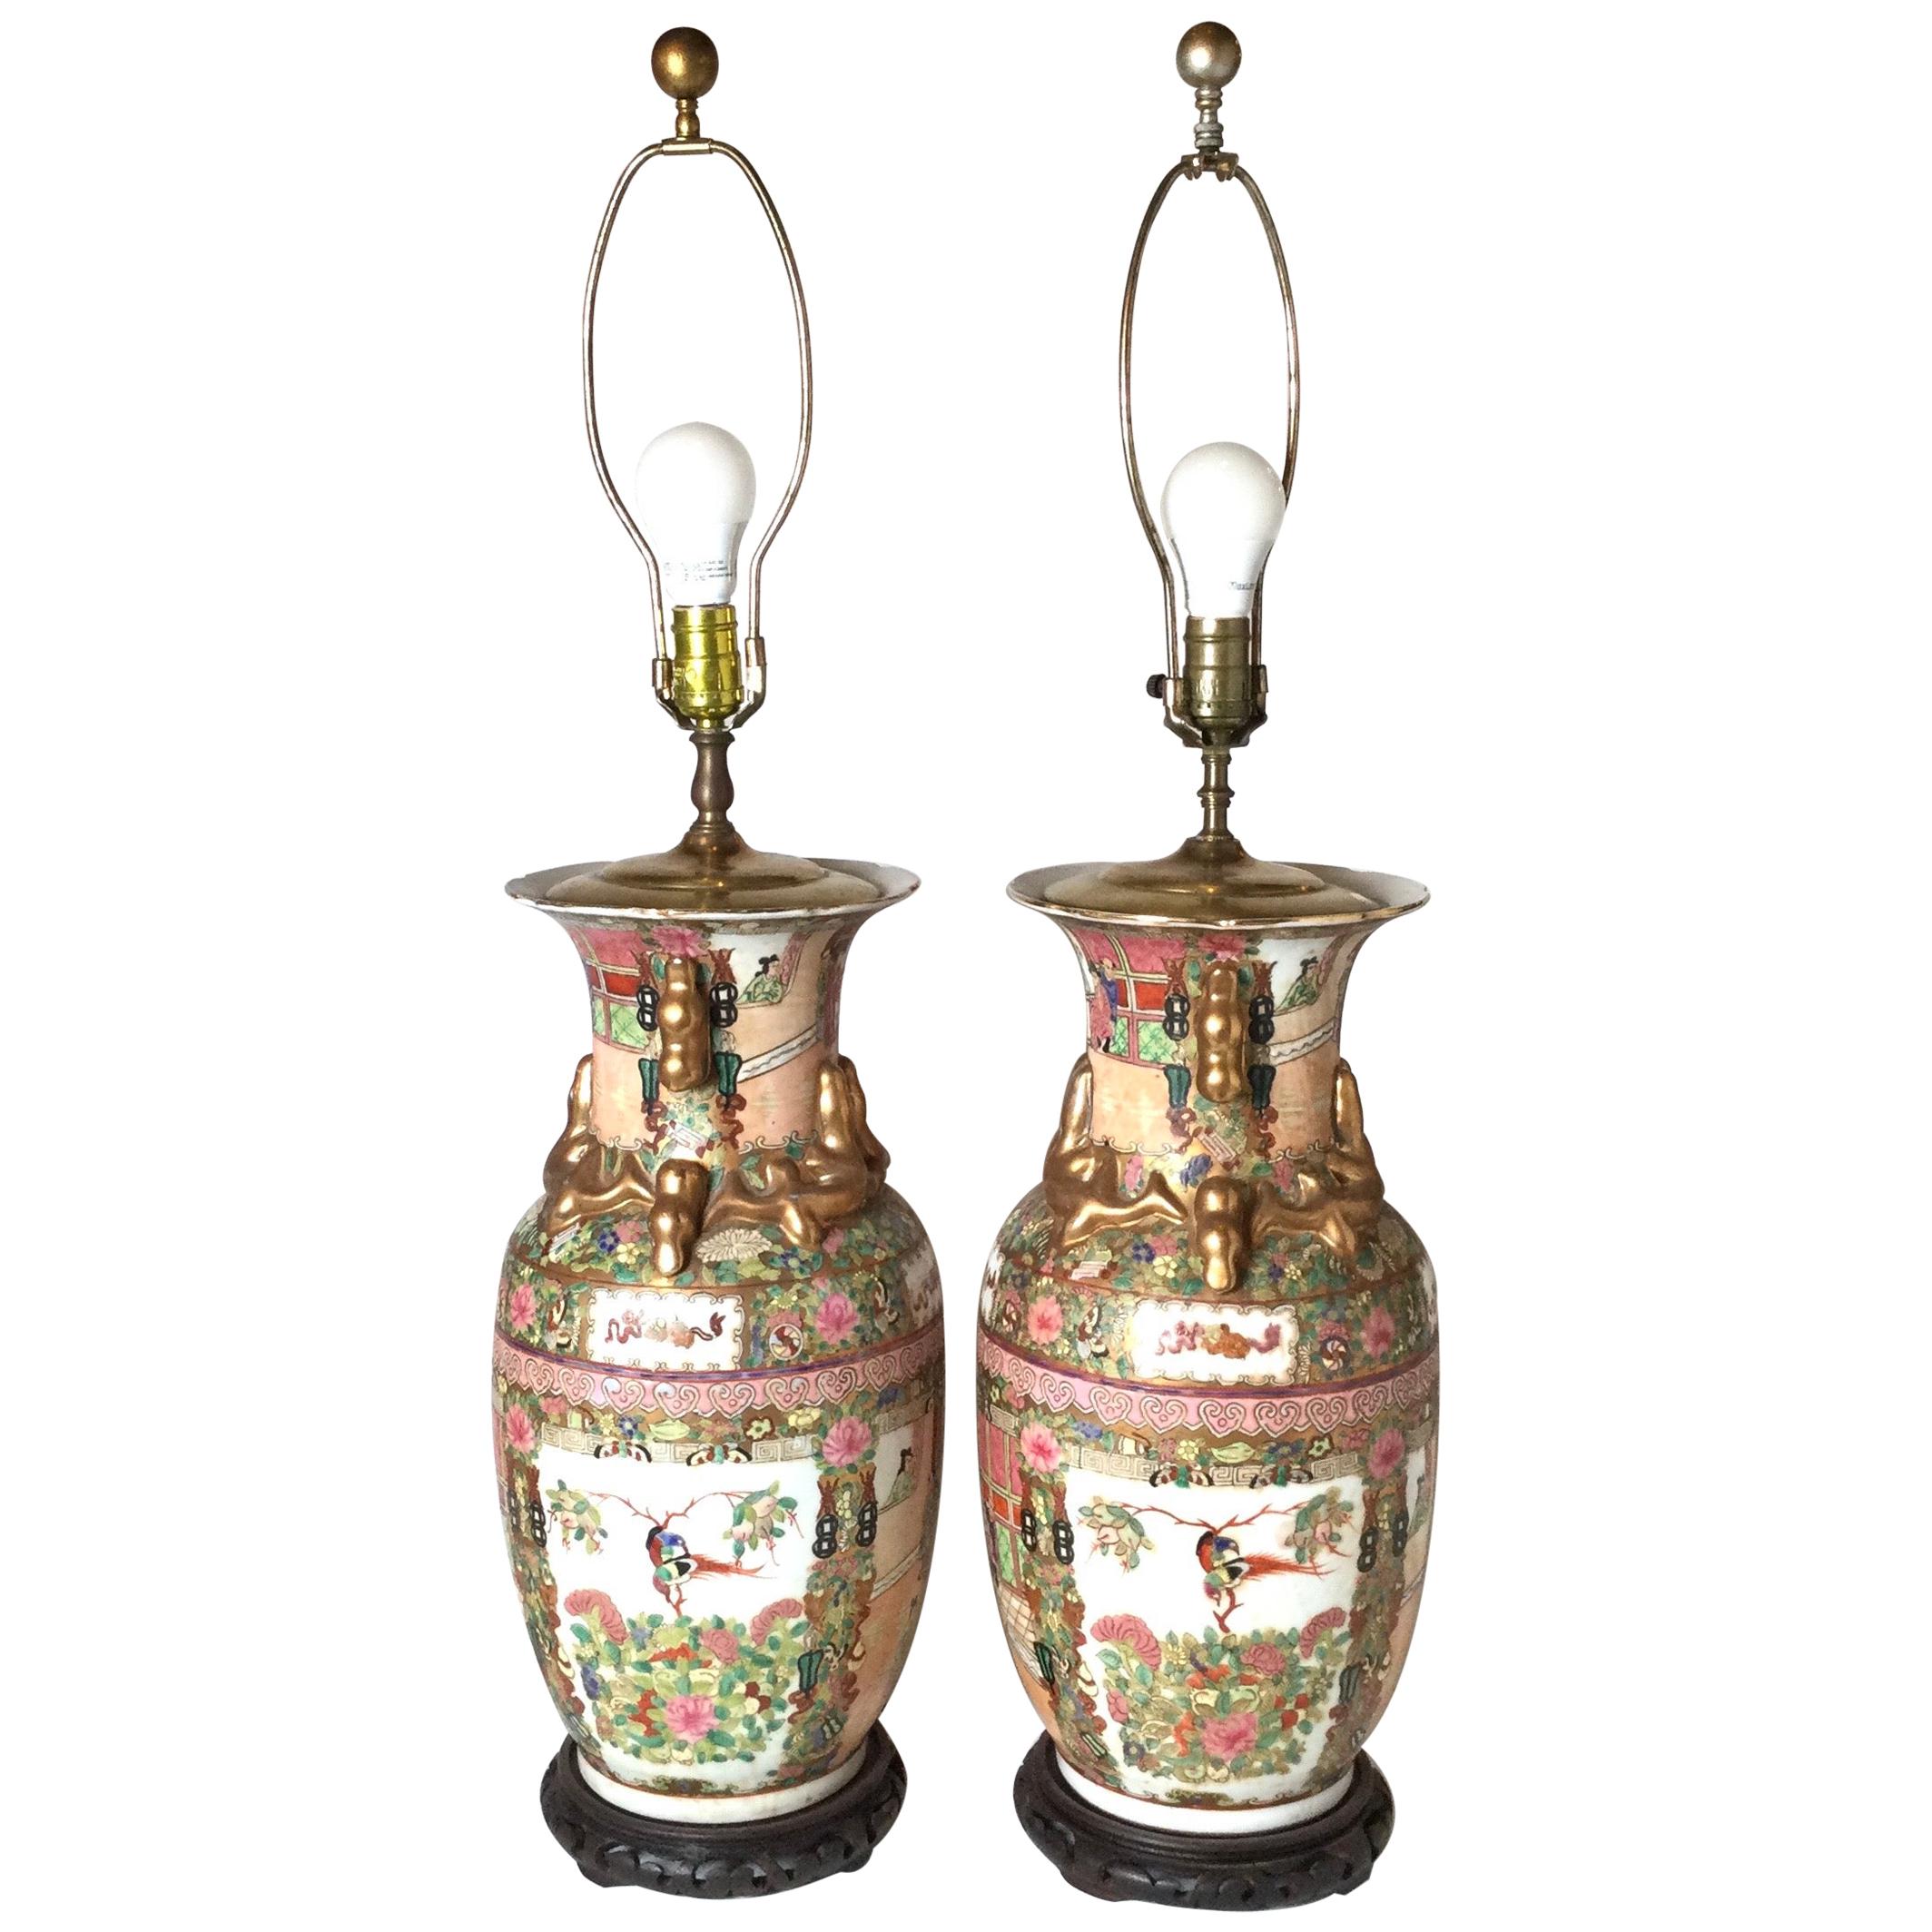 Pair of Chinese Porcelain Lamps with Wood Bases